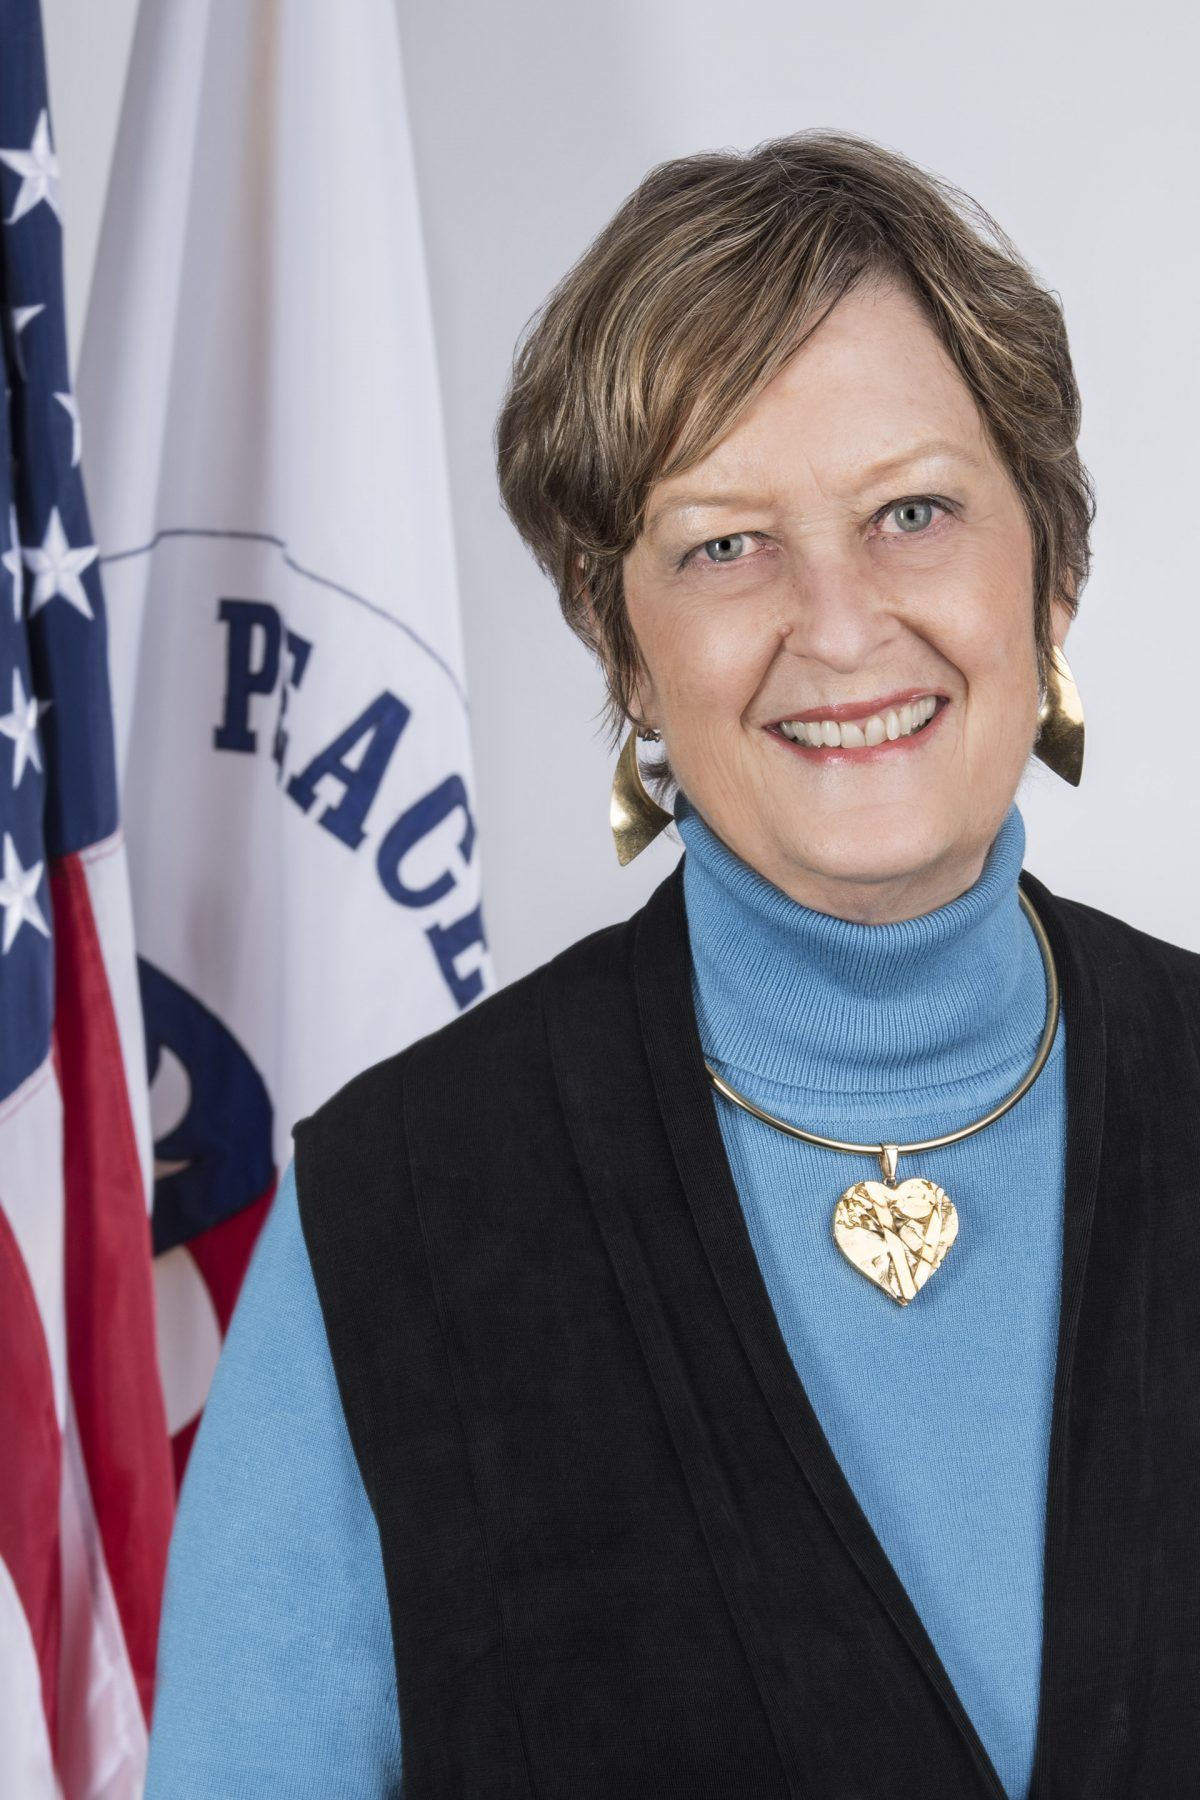 Jody Olsen, Director of the Peace Corps